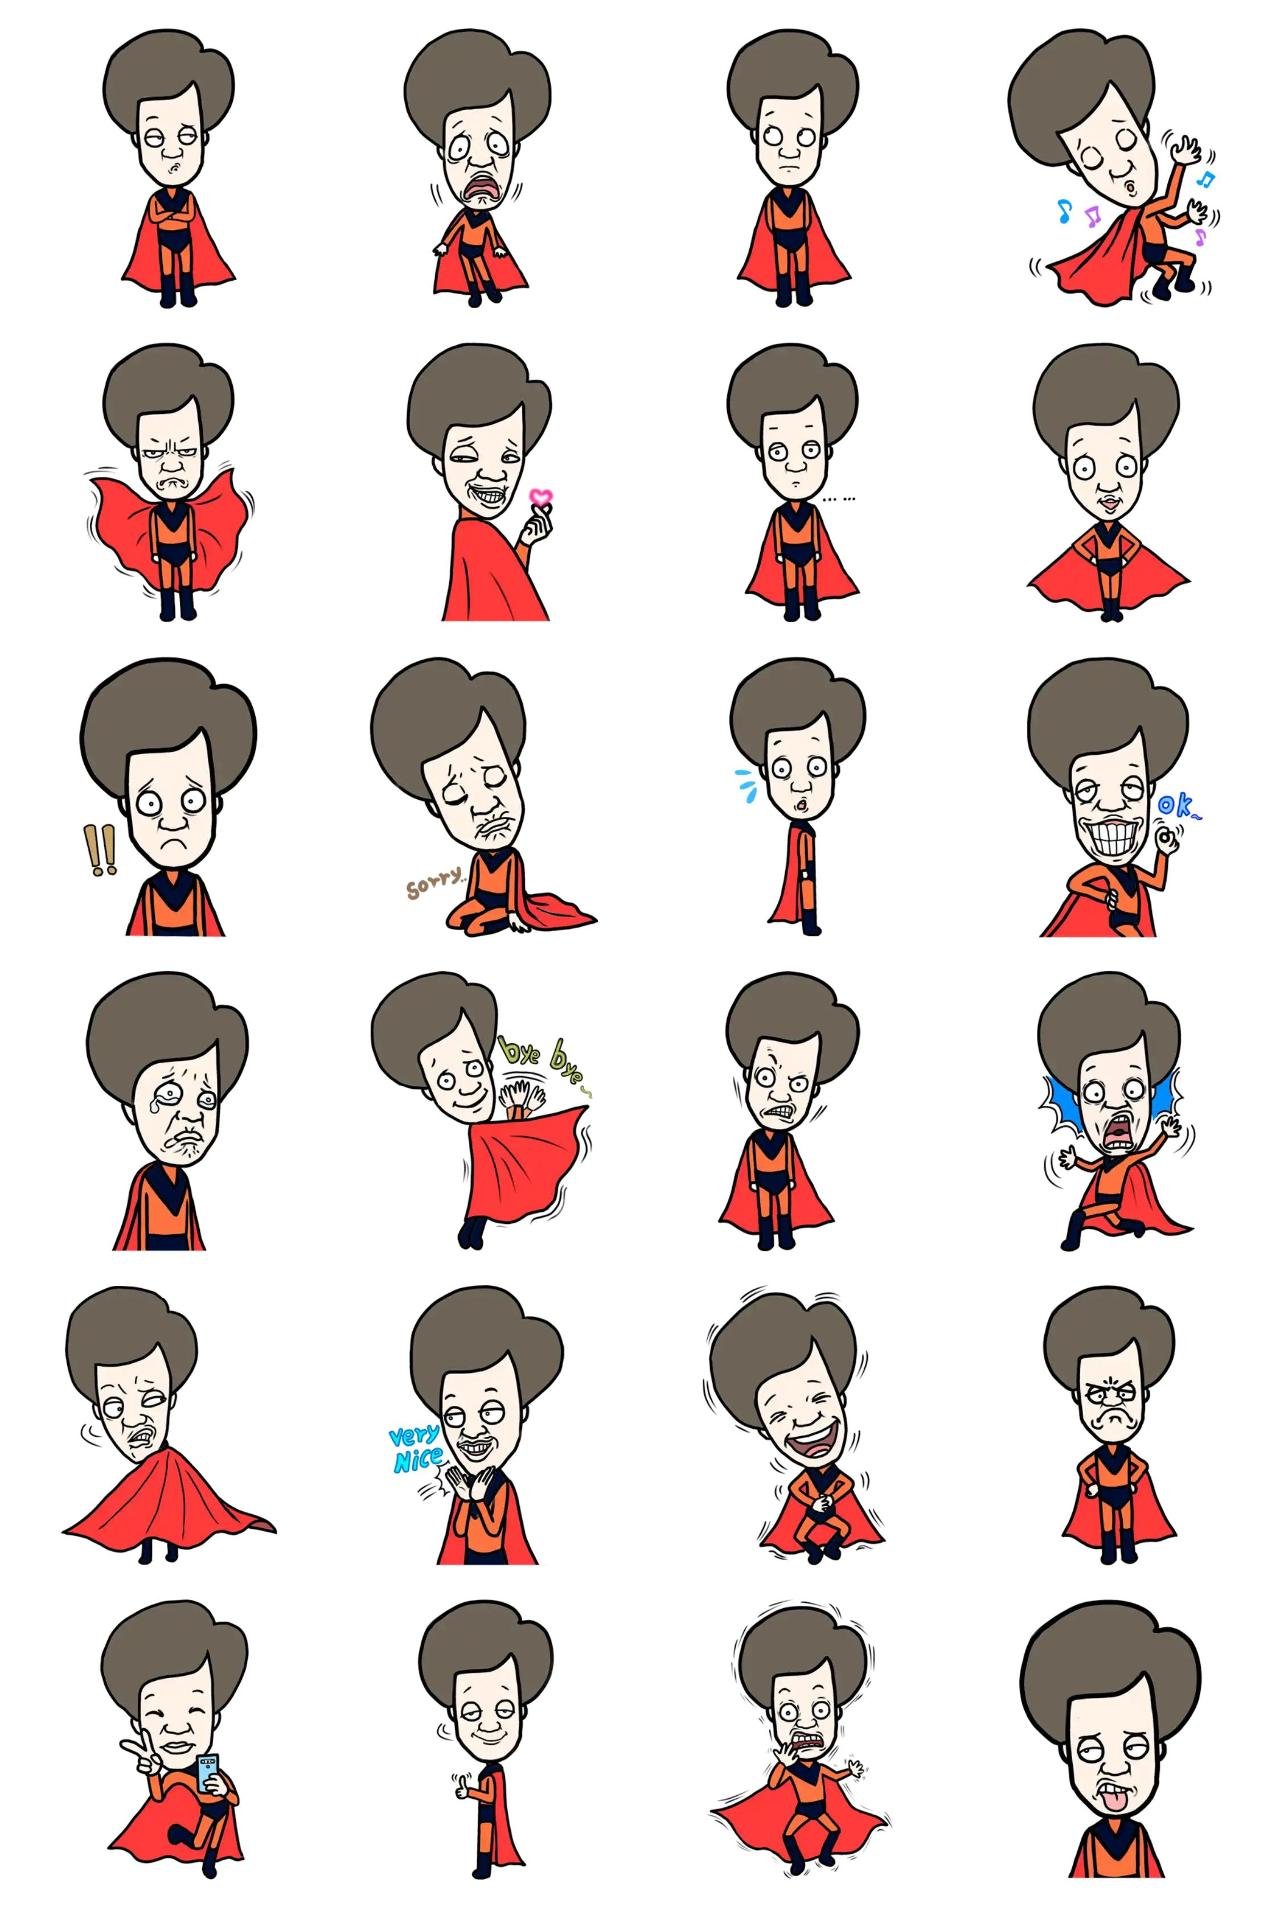 A timid hero JJeongman People sticker pack for Whatsapp, Telegram, Signal, and others chatting and message apps